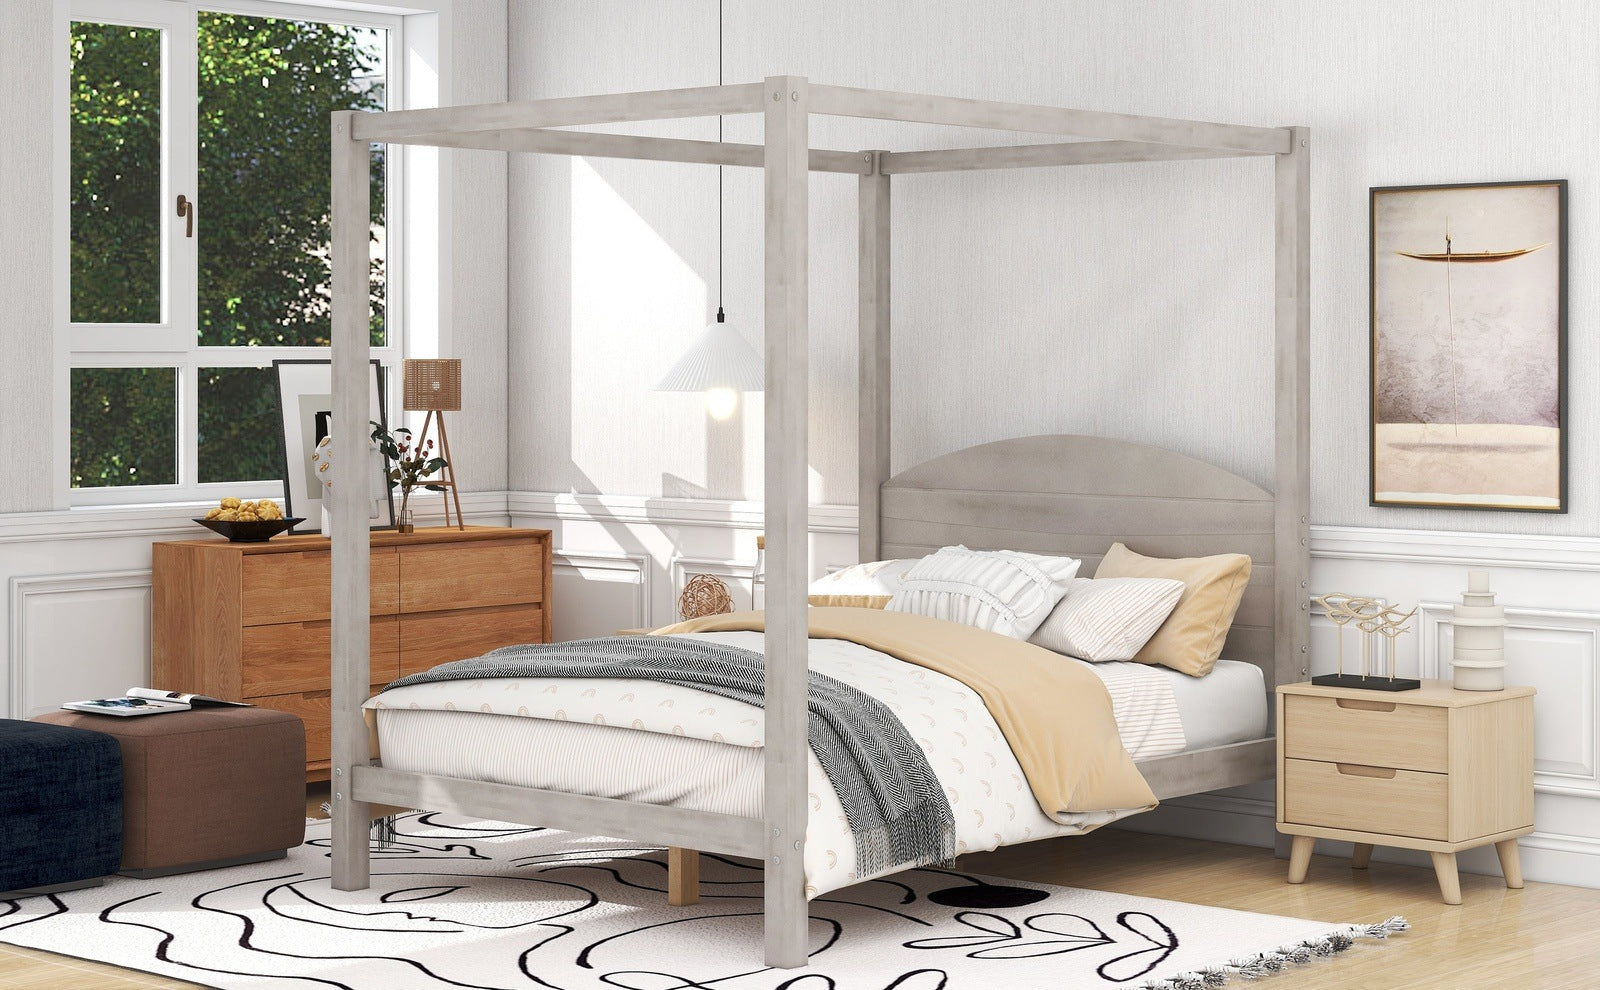 Full Size Canopy Platform Bed with Headboard and Support Legs,Grey Wash